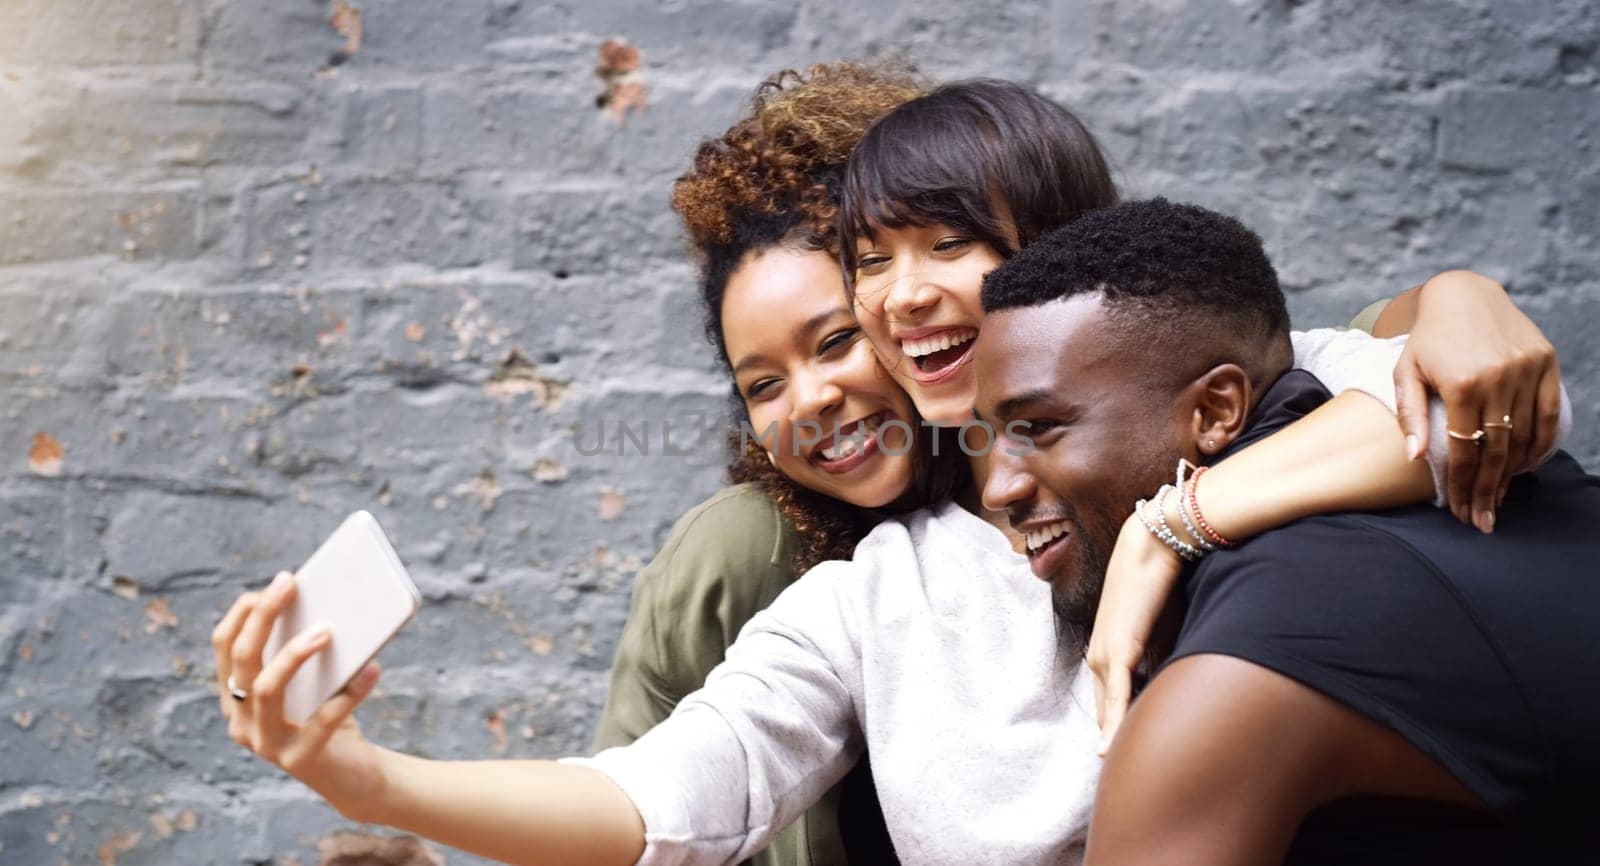 Selfie, social media and smile with friends on brick wall background for profile picture update. App, energy or excitement with happy man and woman group in city for mobile or online photography by YuriArcurs